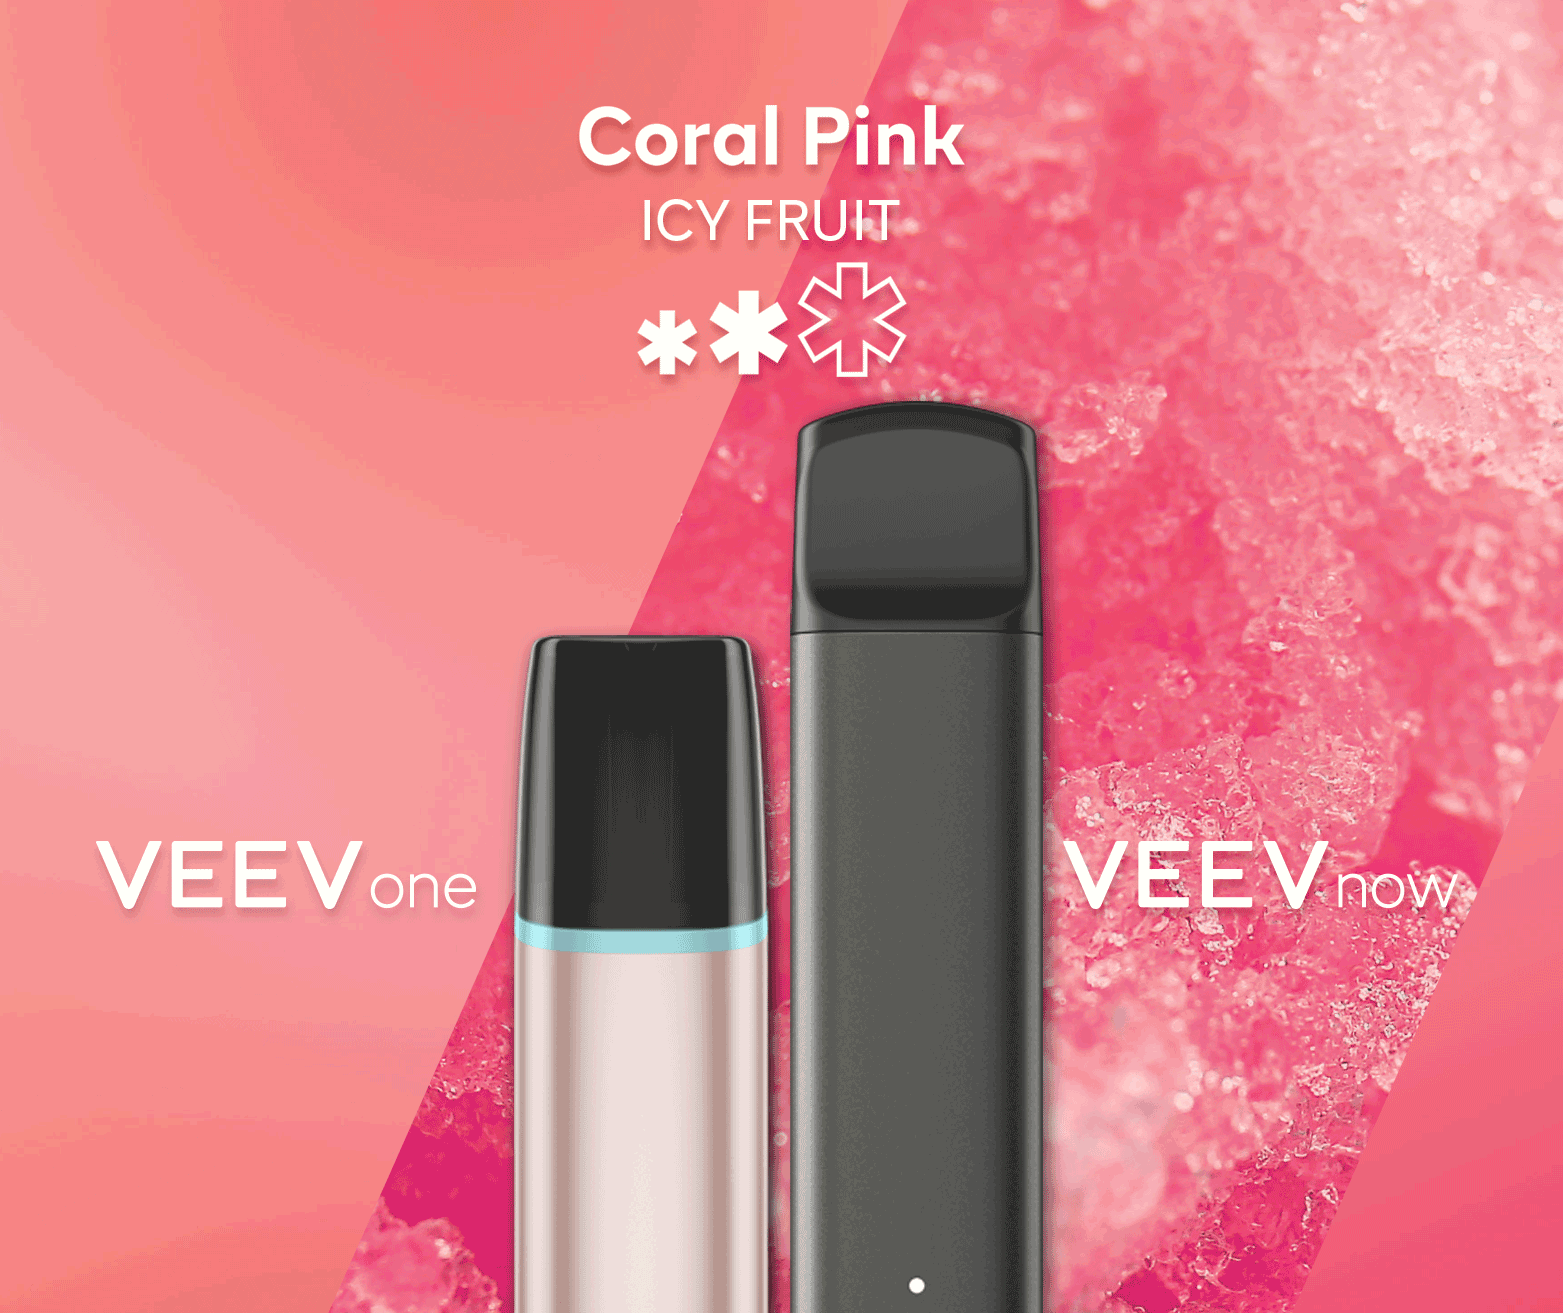 A VEEV ONE pod device and VEEV NOW disposable, both in Coral Pink flavour.